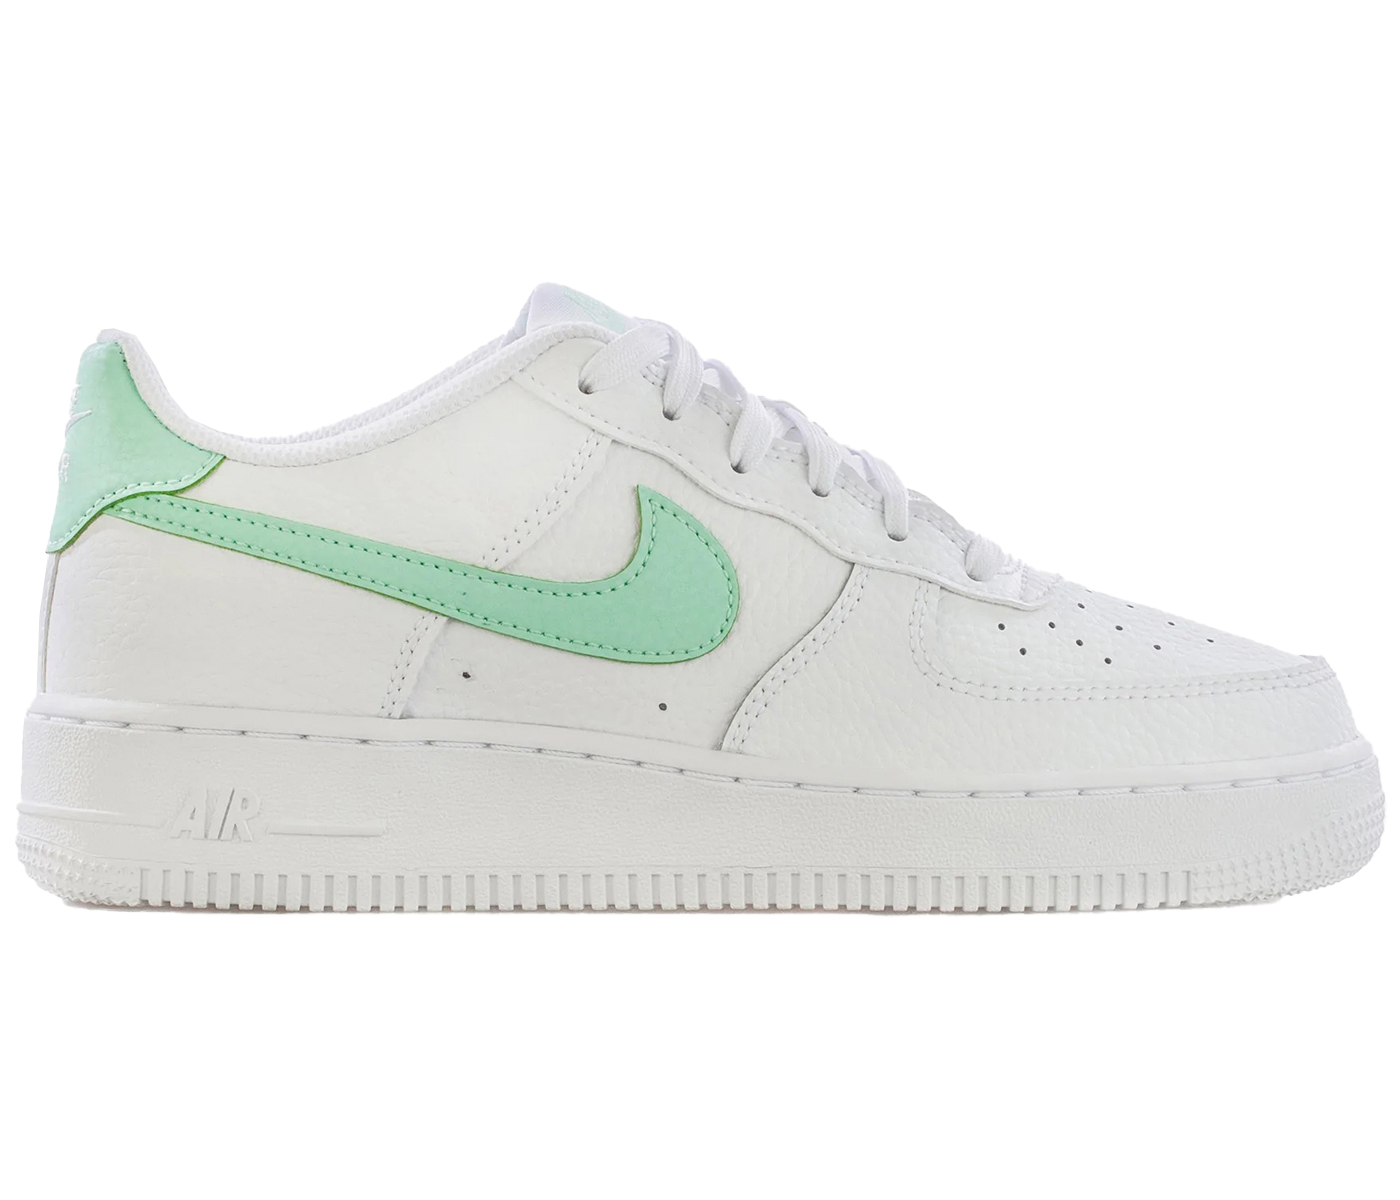 Nike Air Force 1 Low Mint Swoosh (GS)